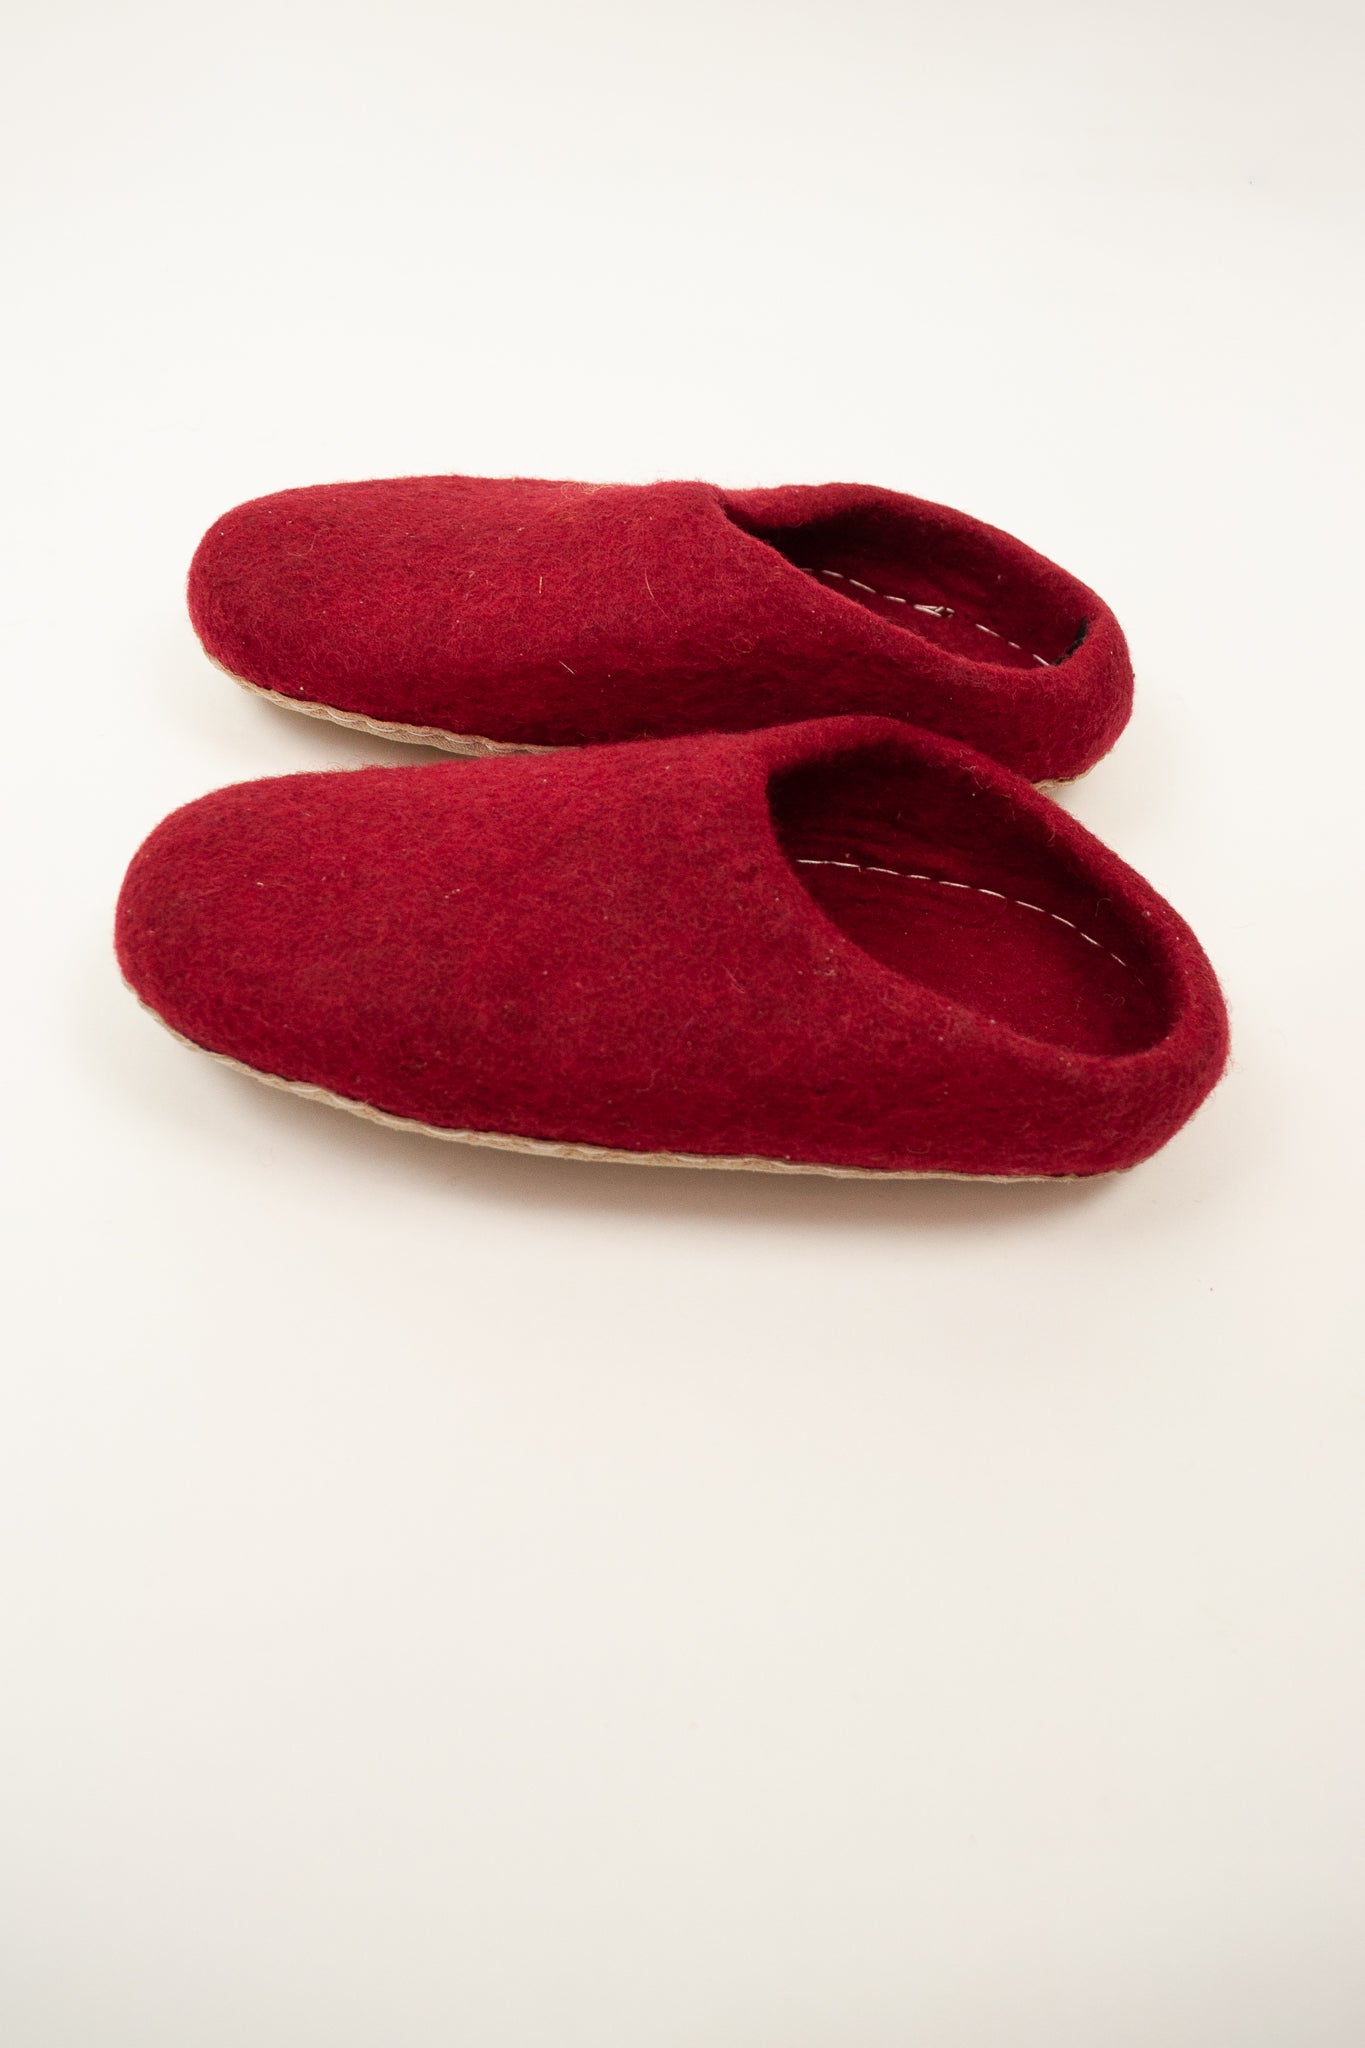 Crimson wool felt slippers, slip on style, fair trade and ethically made in Nepal.